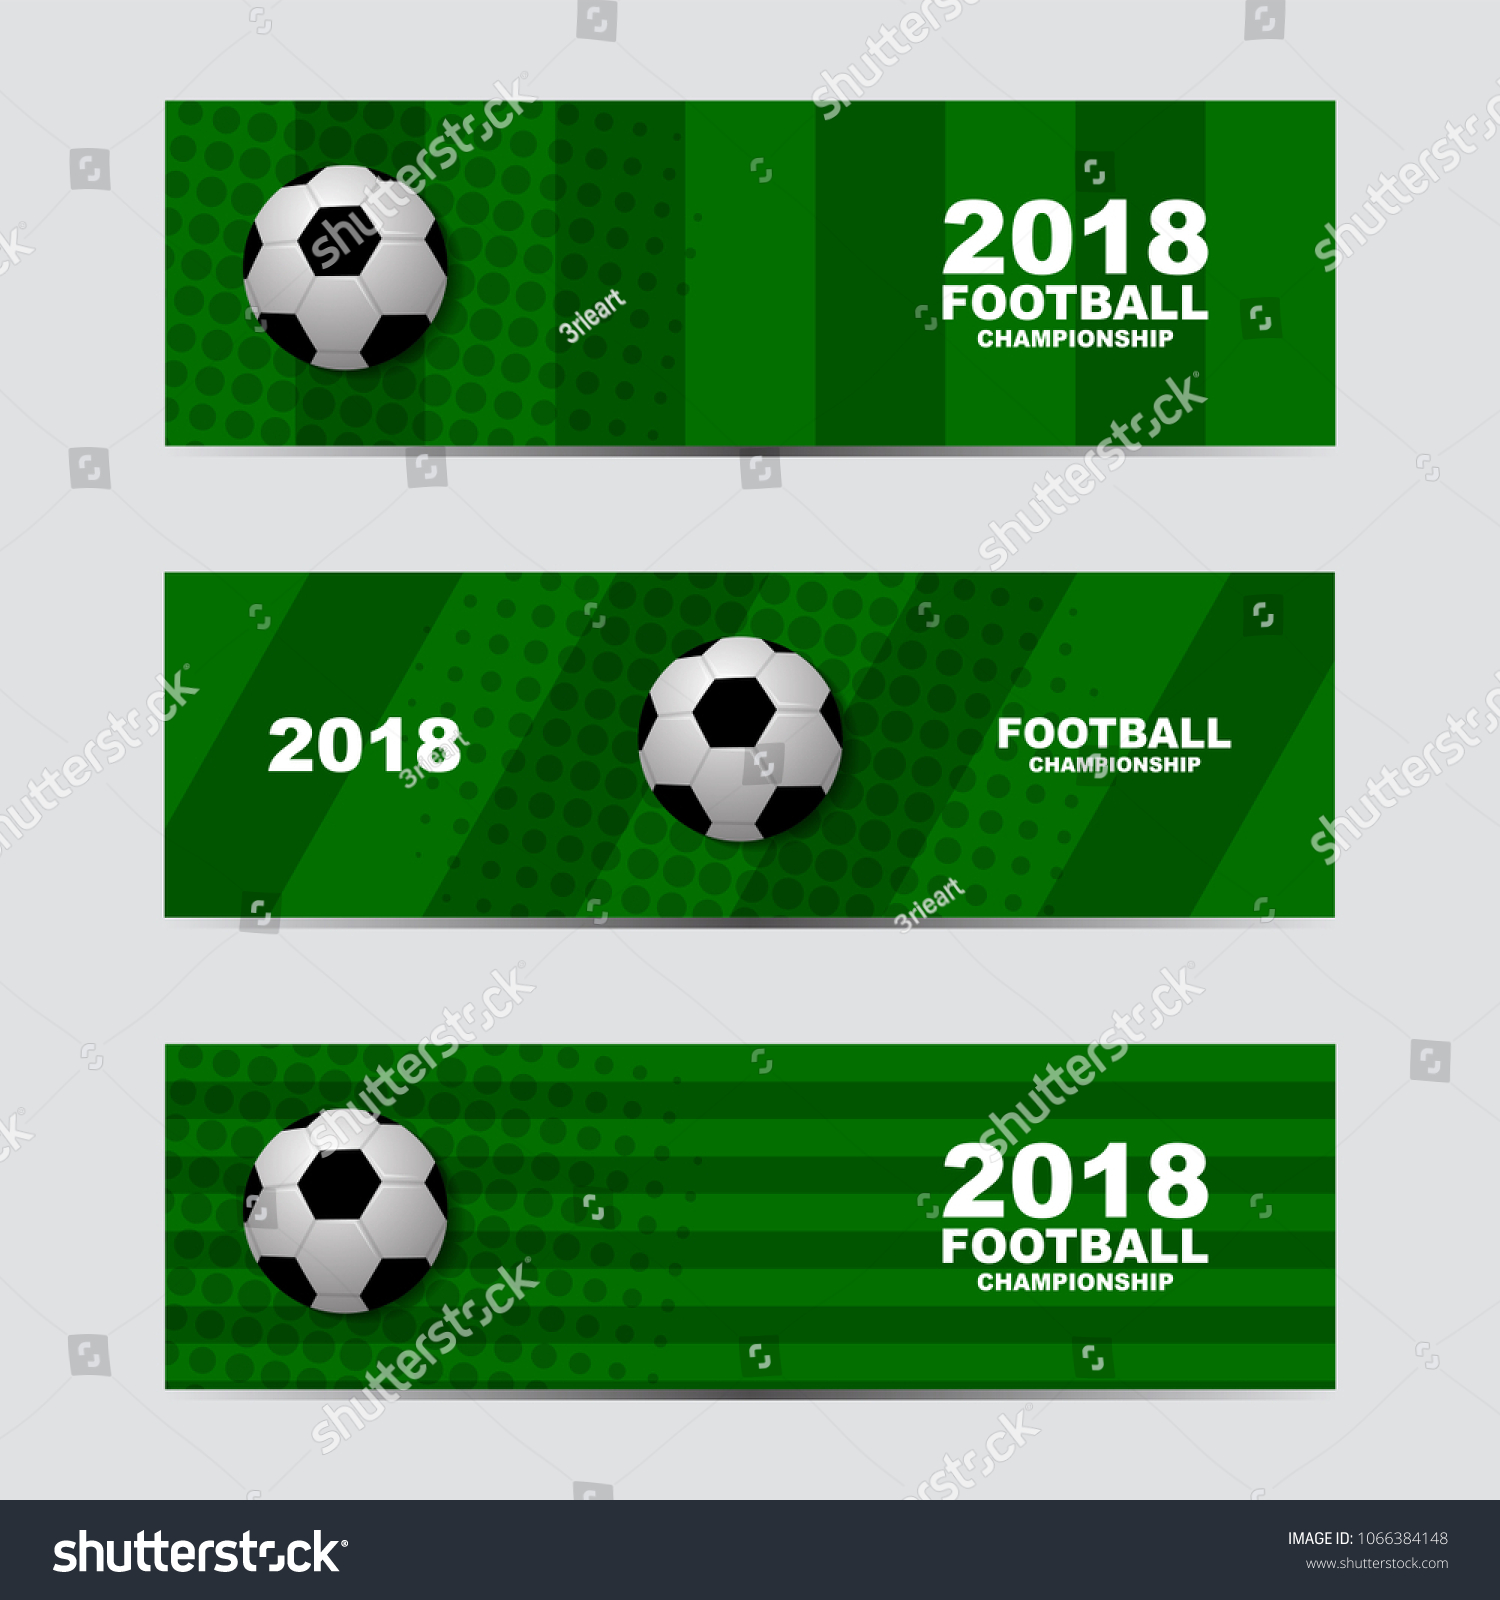 Soccer Player Cards Template from image.shutterstock.com